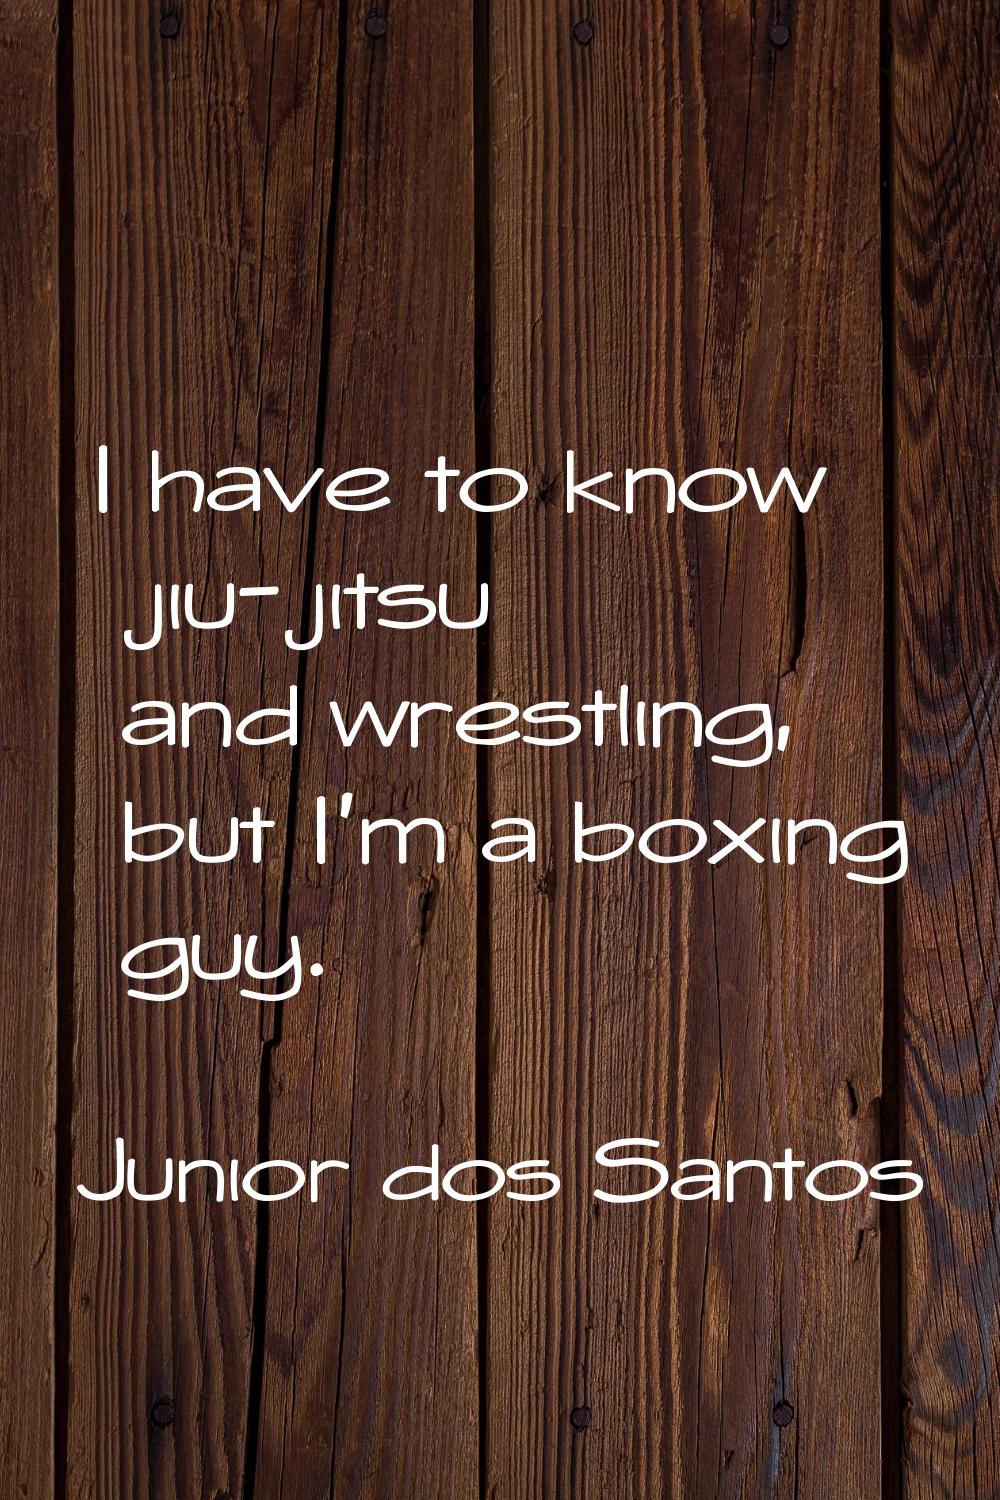 I have to know jiu-jitsu and wrestling, but I'm a boxing guy.